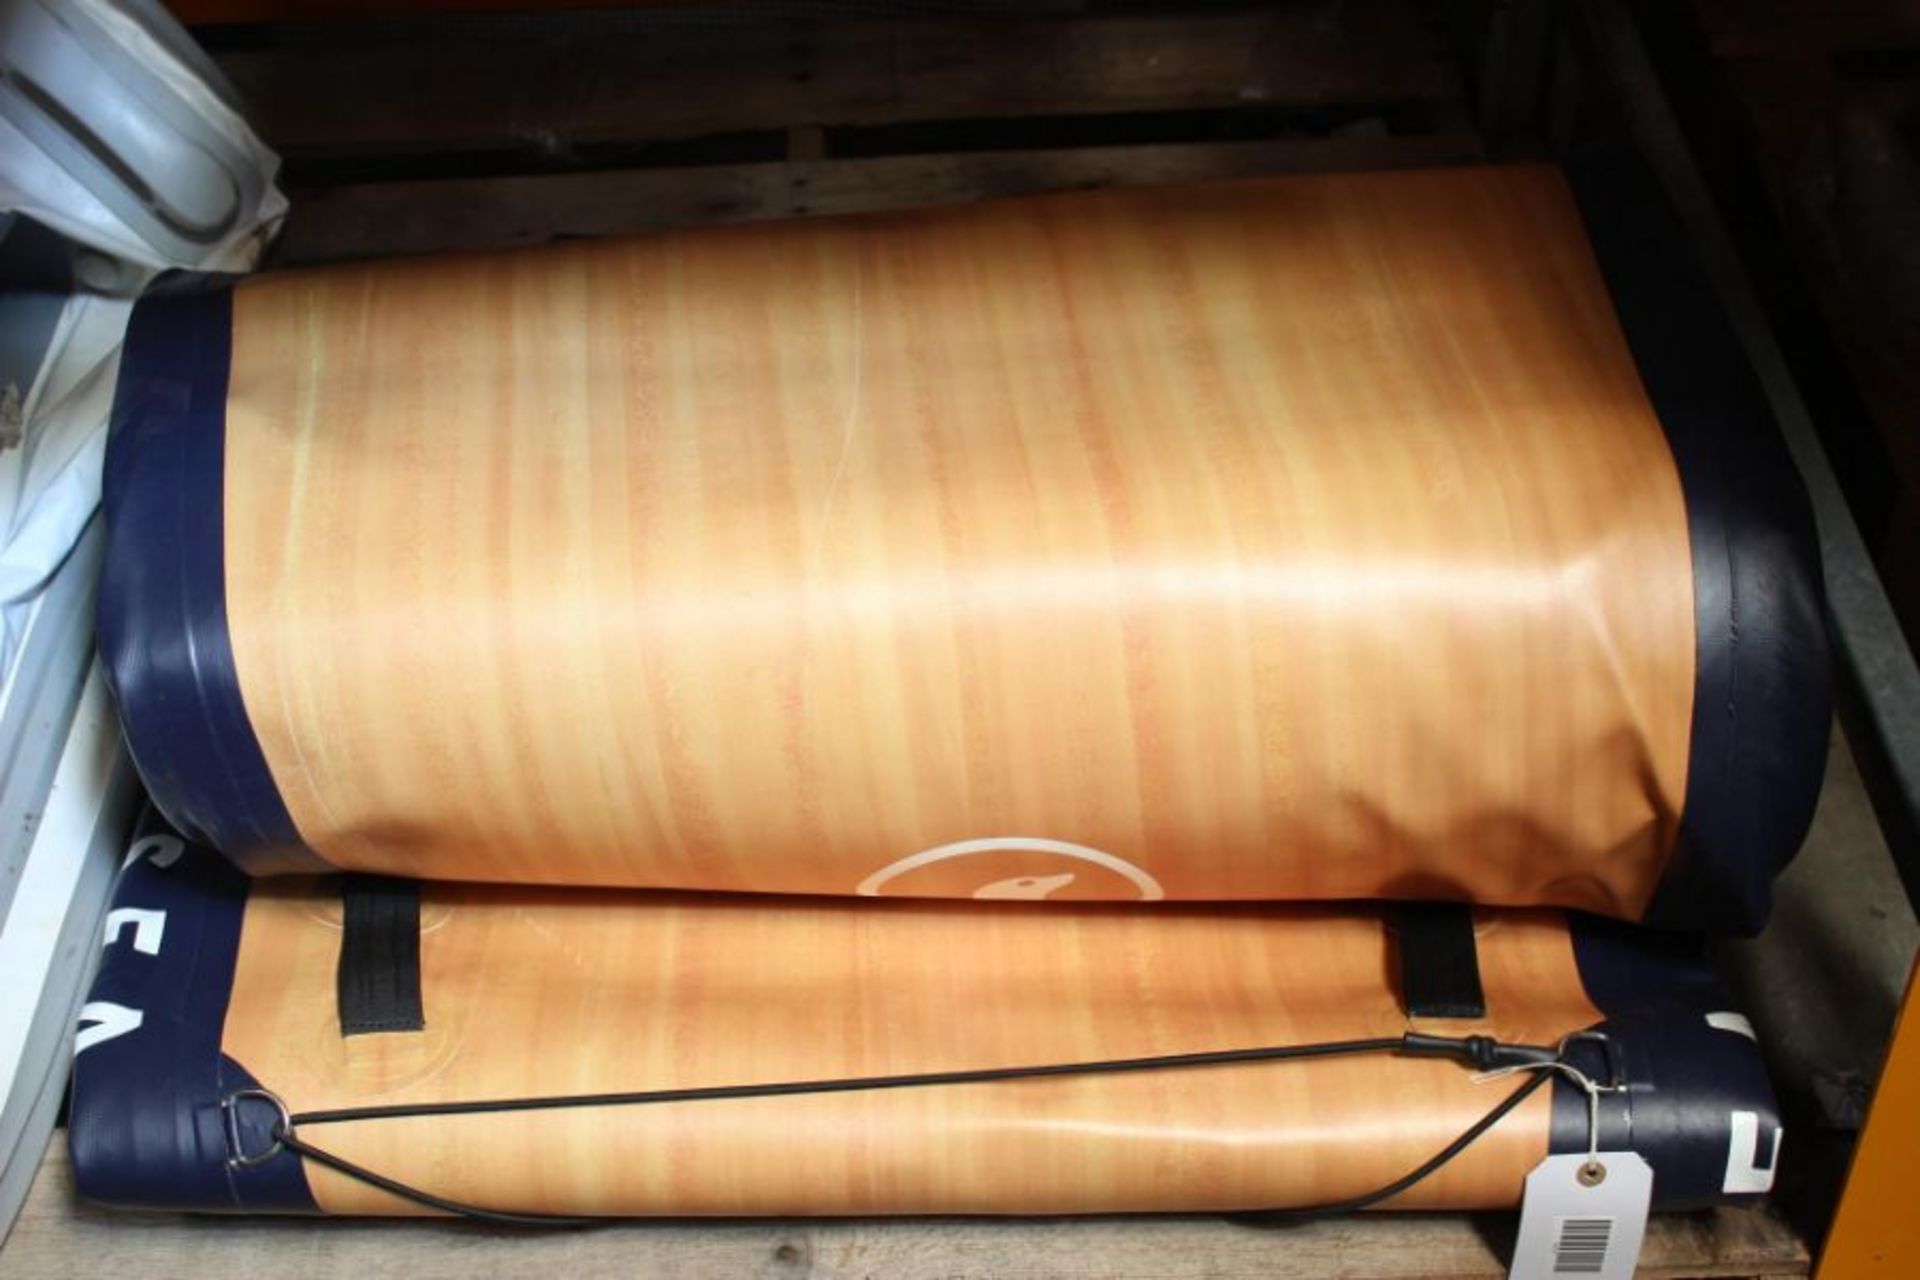 A pre-owned Sealion 12'6" Tasman - Inflatable SUP Board (Board only, viewing recommended).